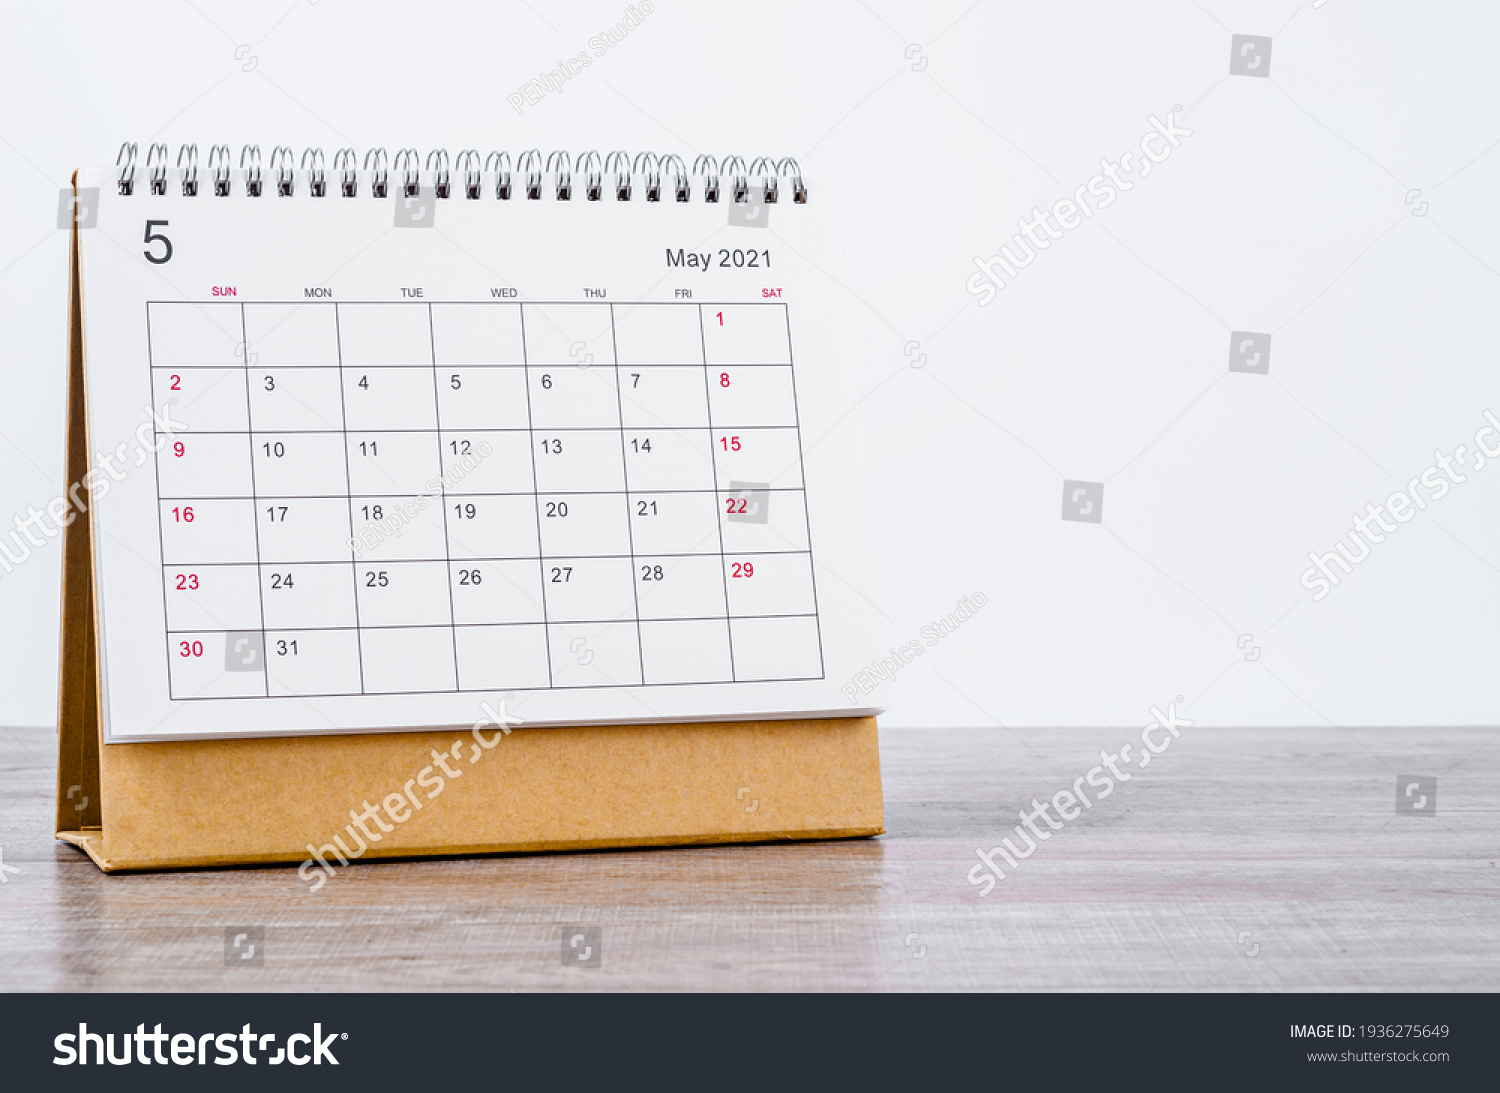 May Calendar 2021 on wooden table background #1936275649